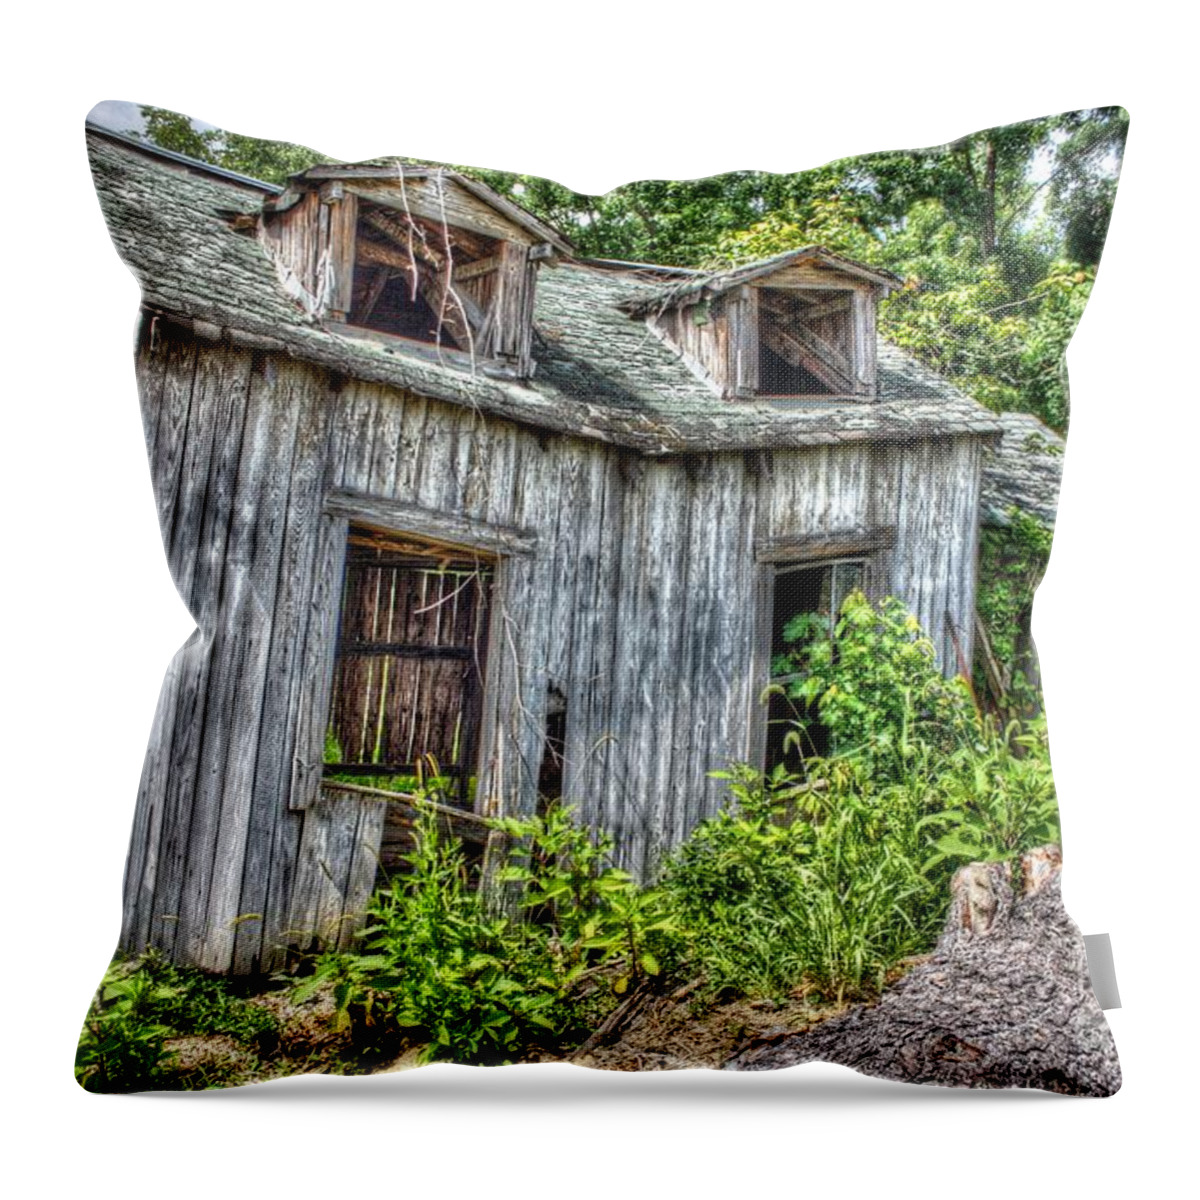 Decay Throw Pillow featuring the digital art There Was A Crooked Man by Dan Stone